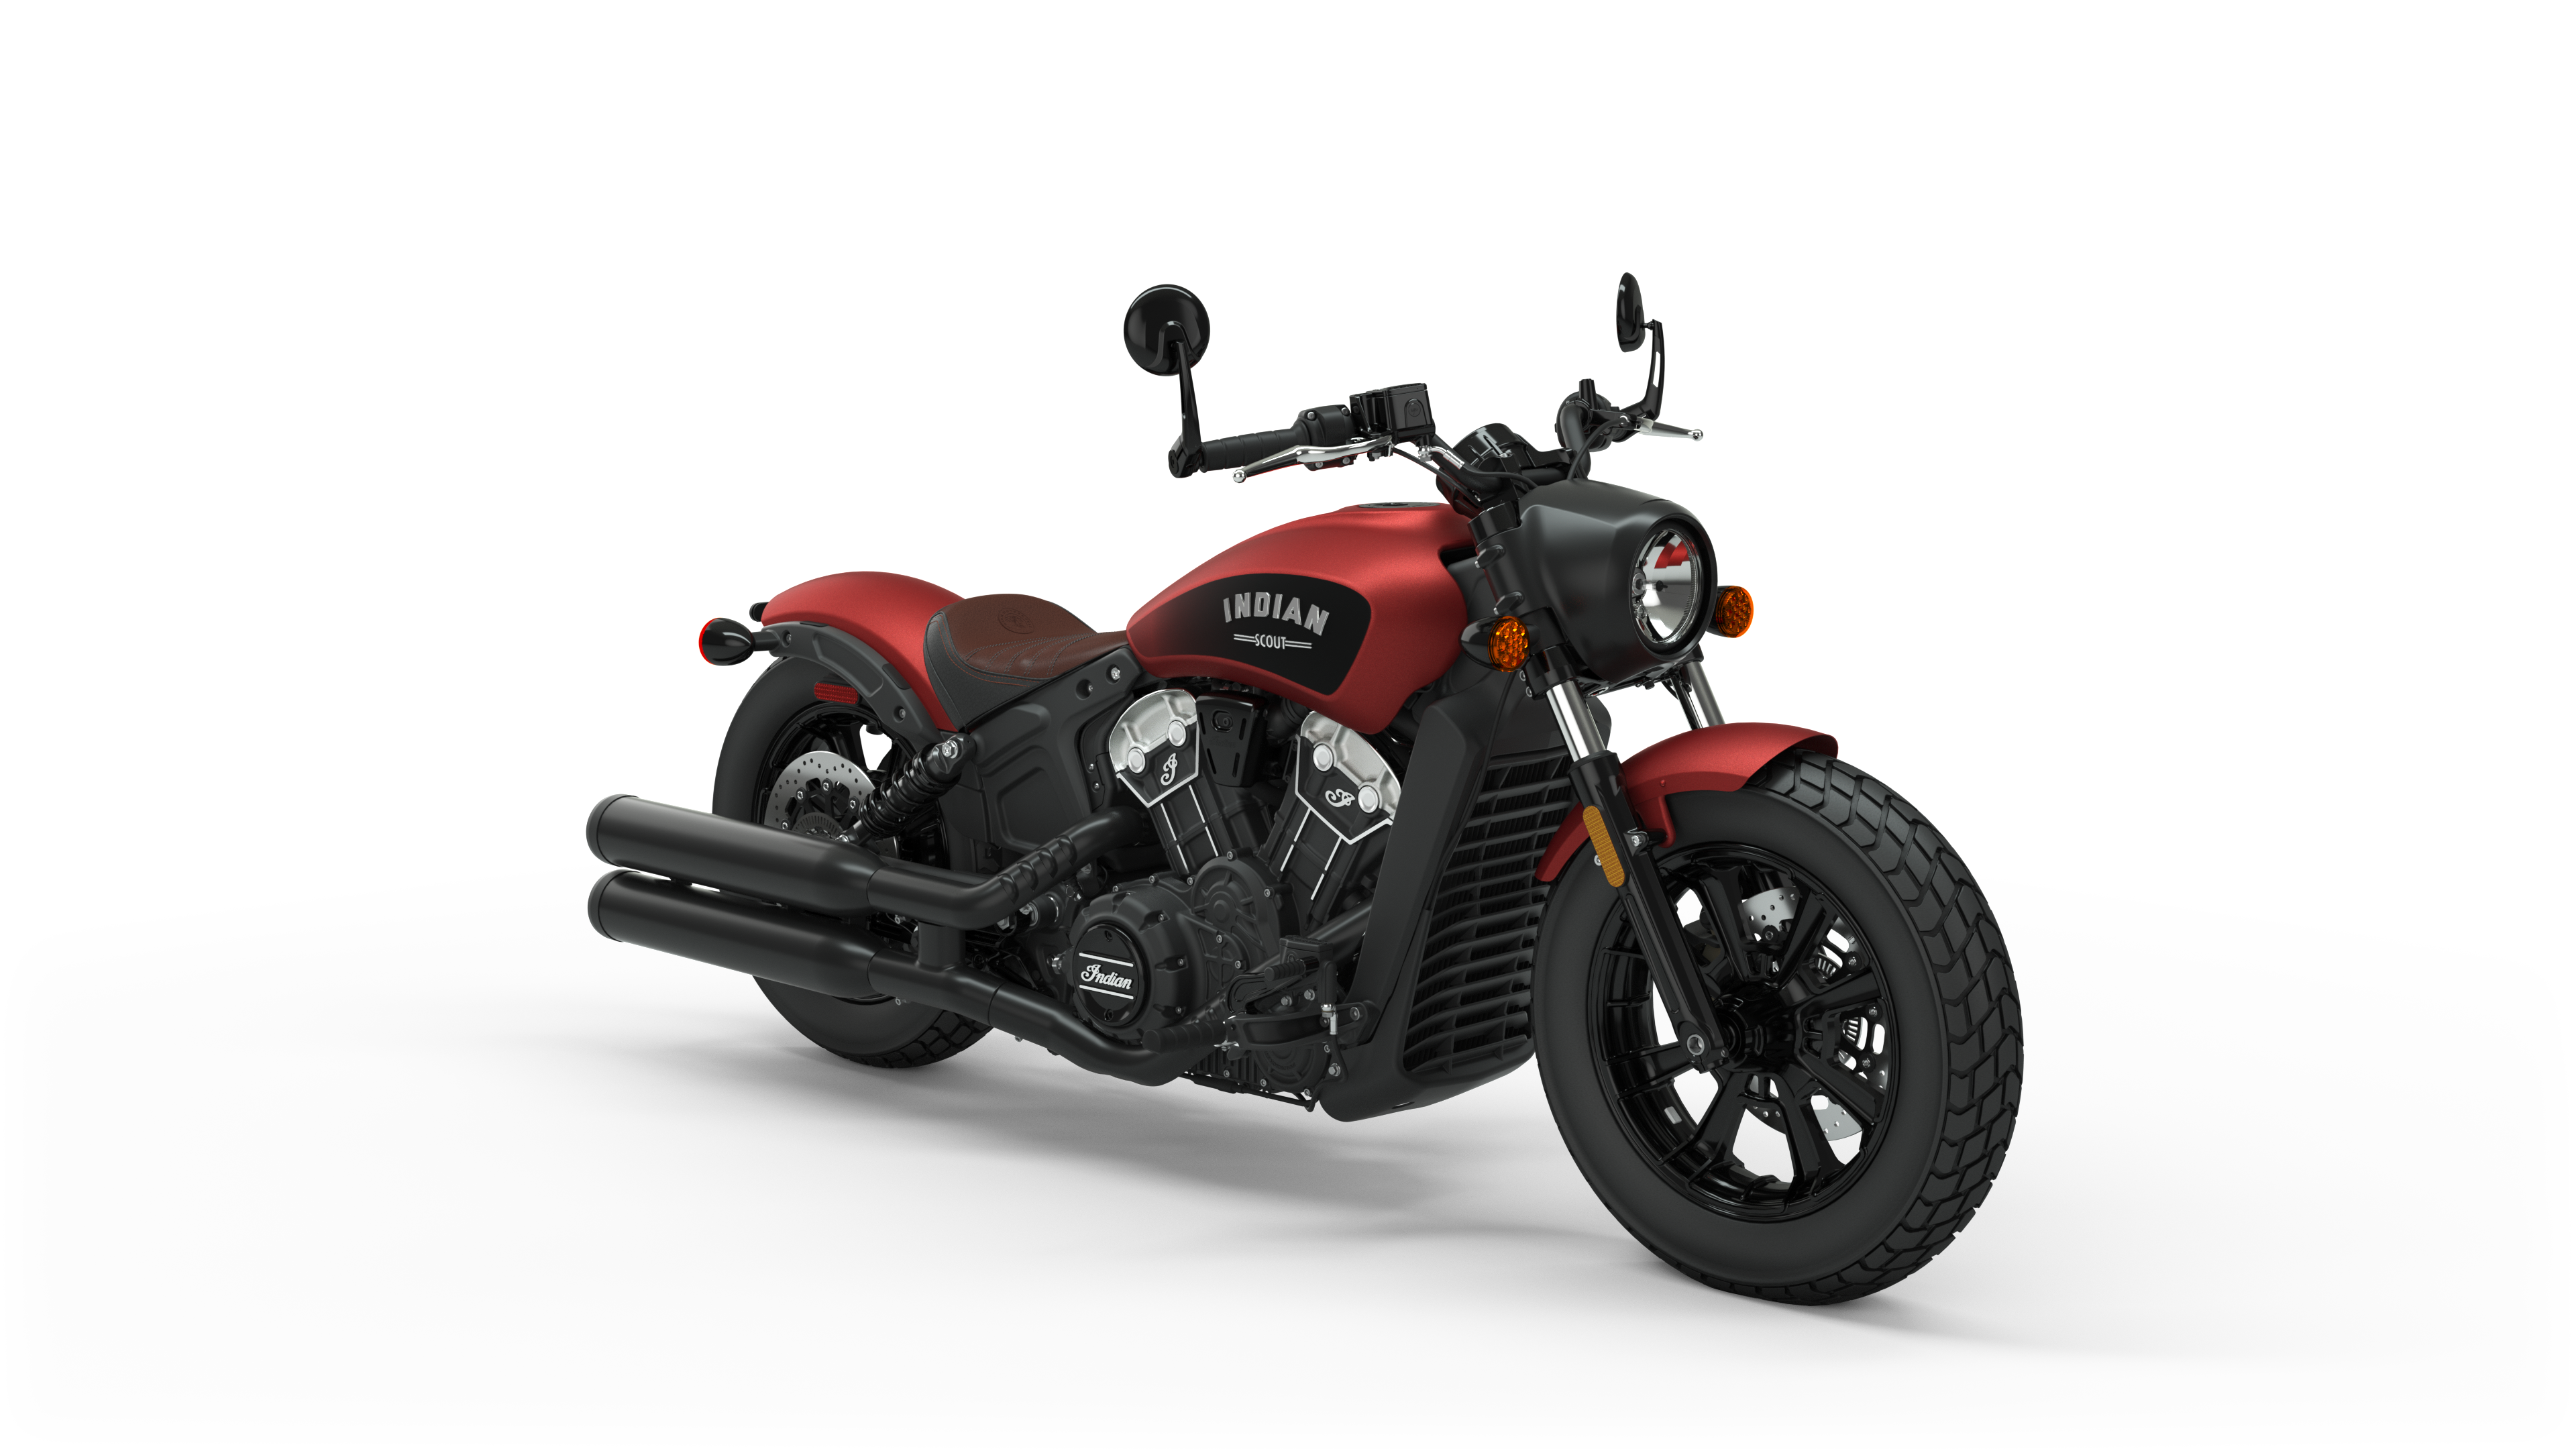 2020 Indian Scout Bobber Buyer's Guide: Specs, Photos, Price